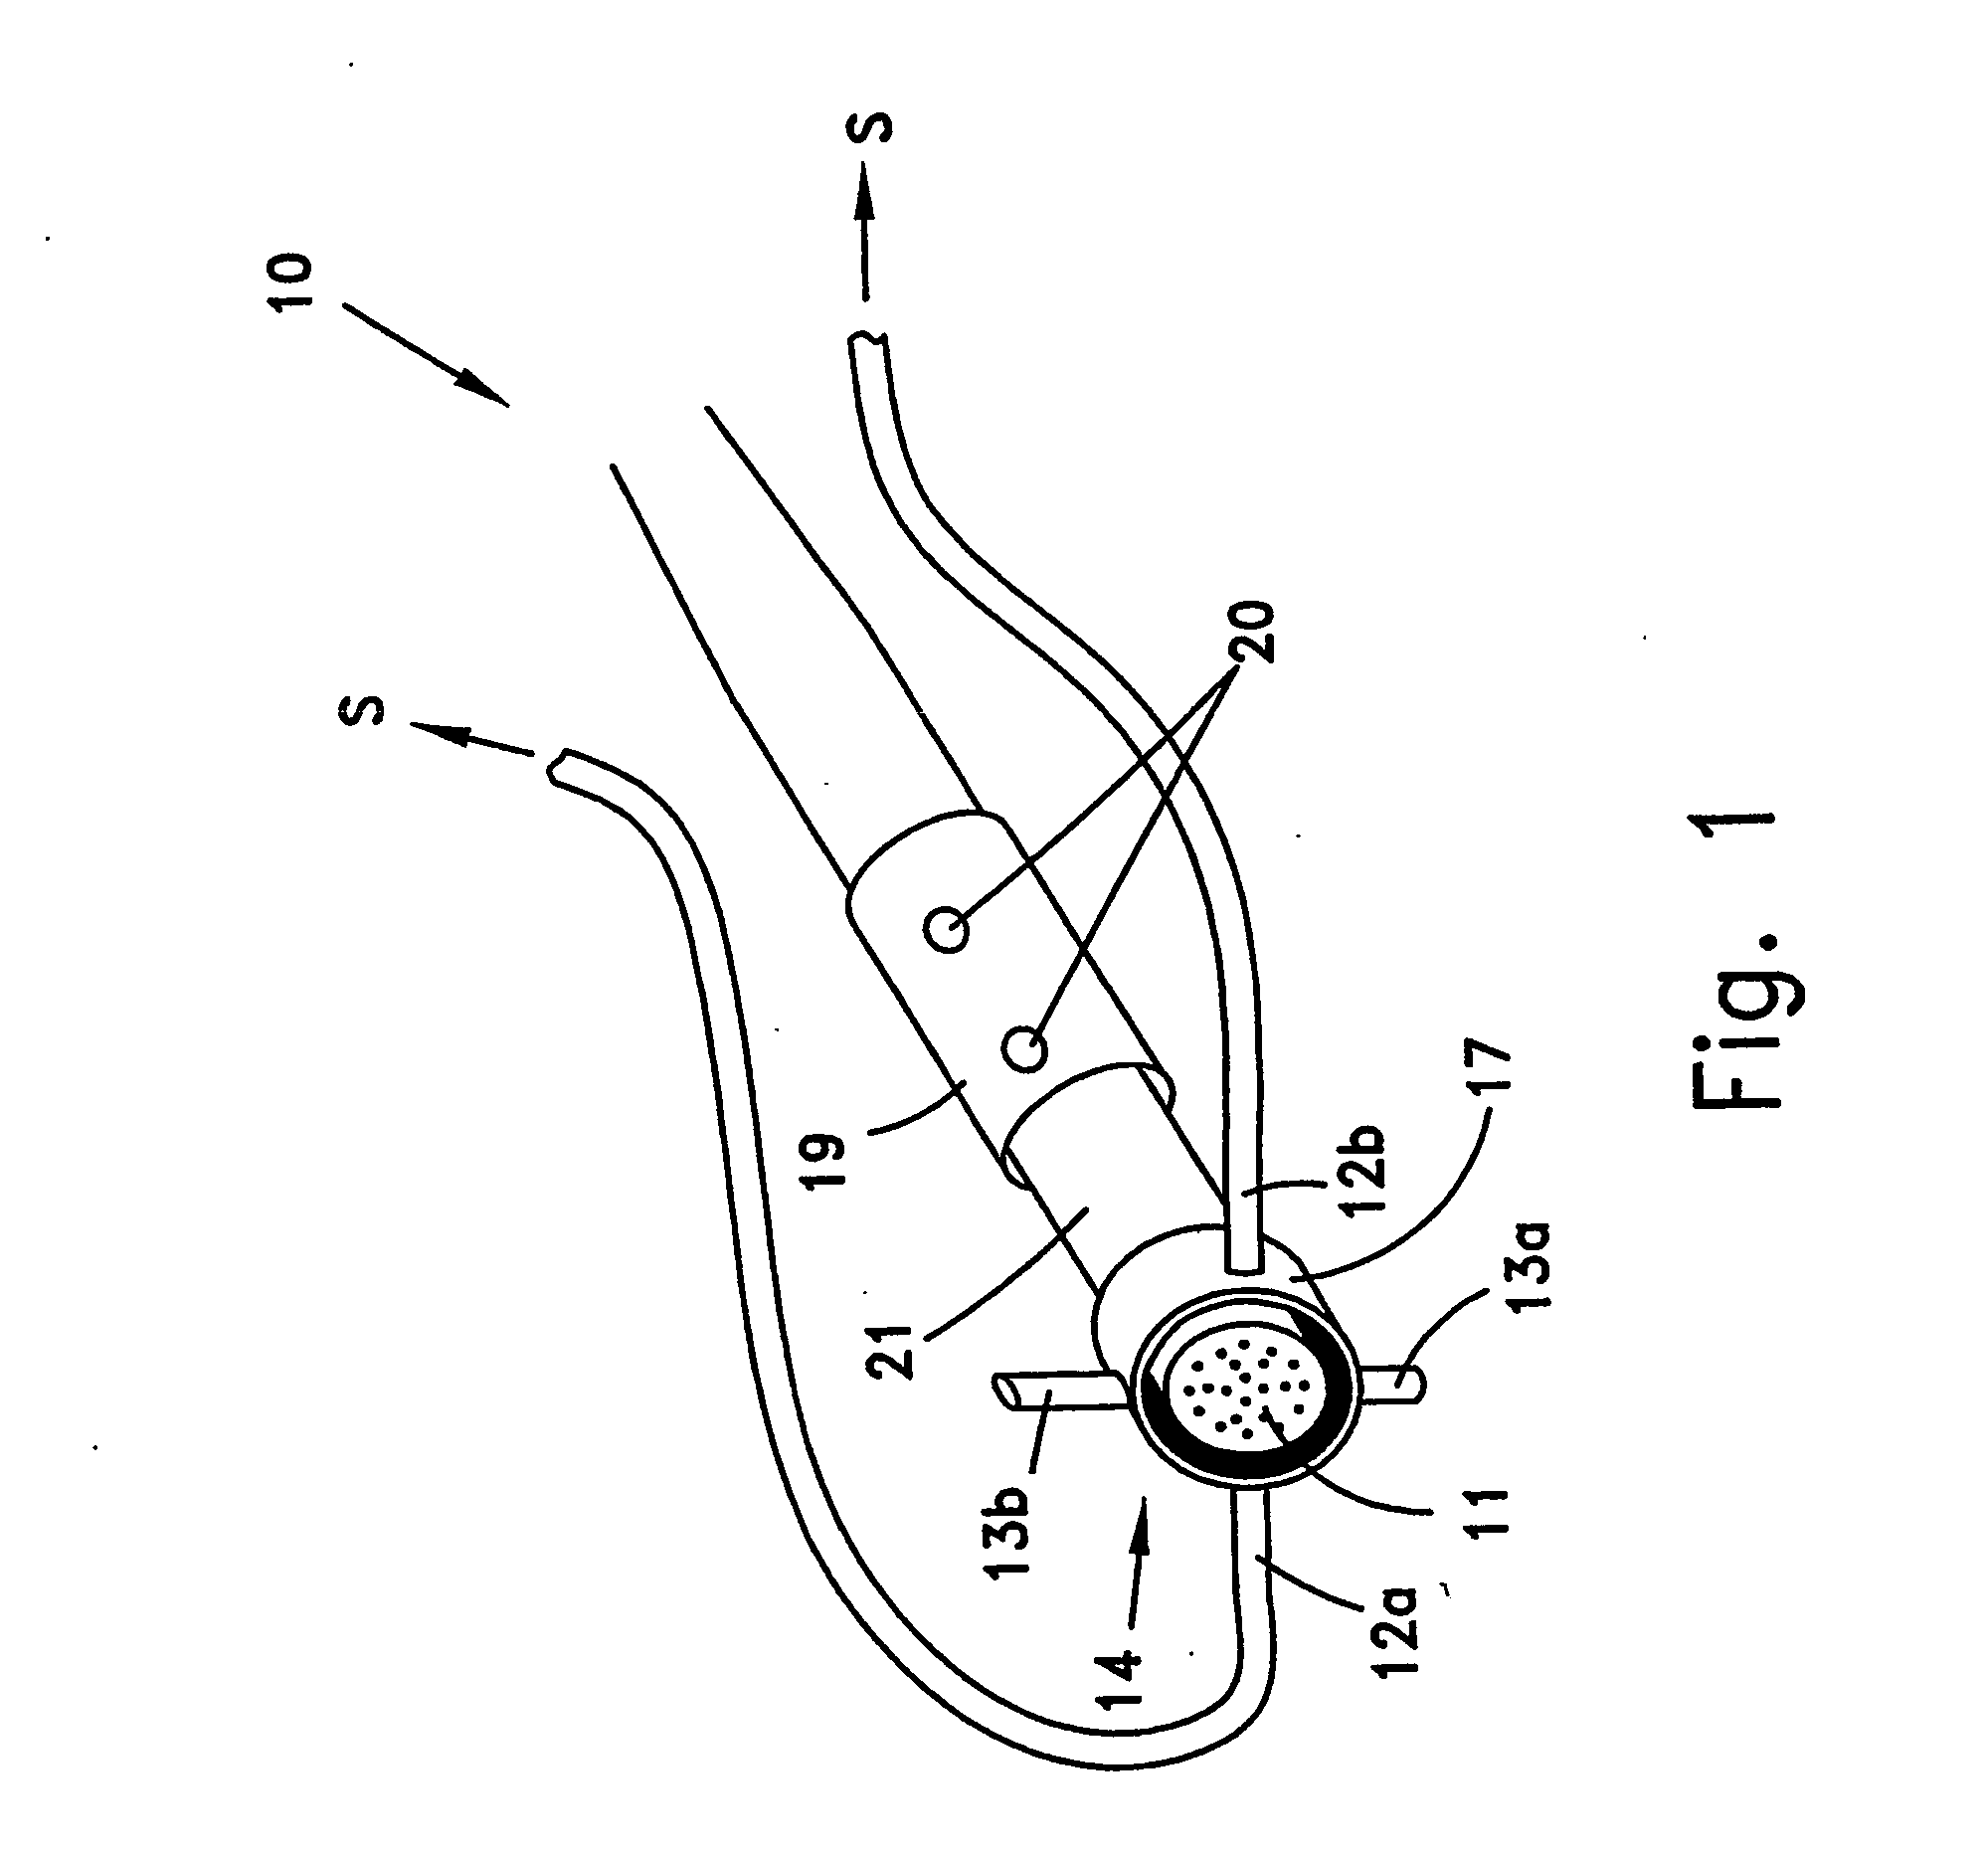 Apparatus and method for removing pigments from a pigmented section of skin